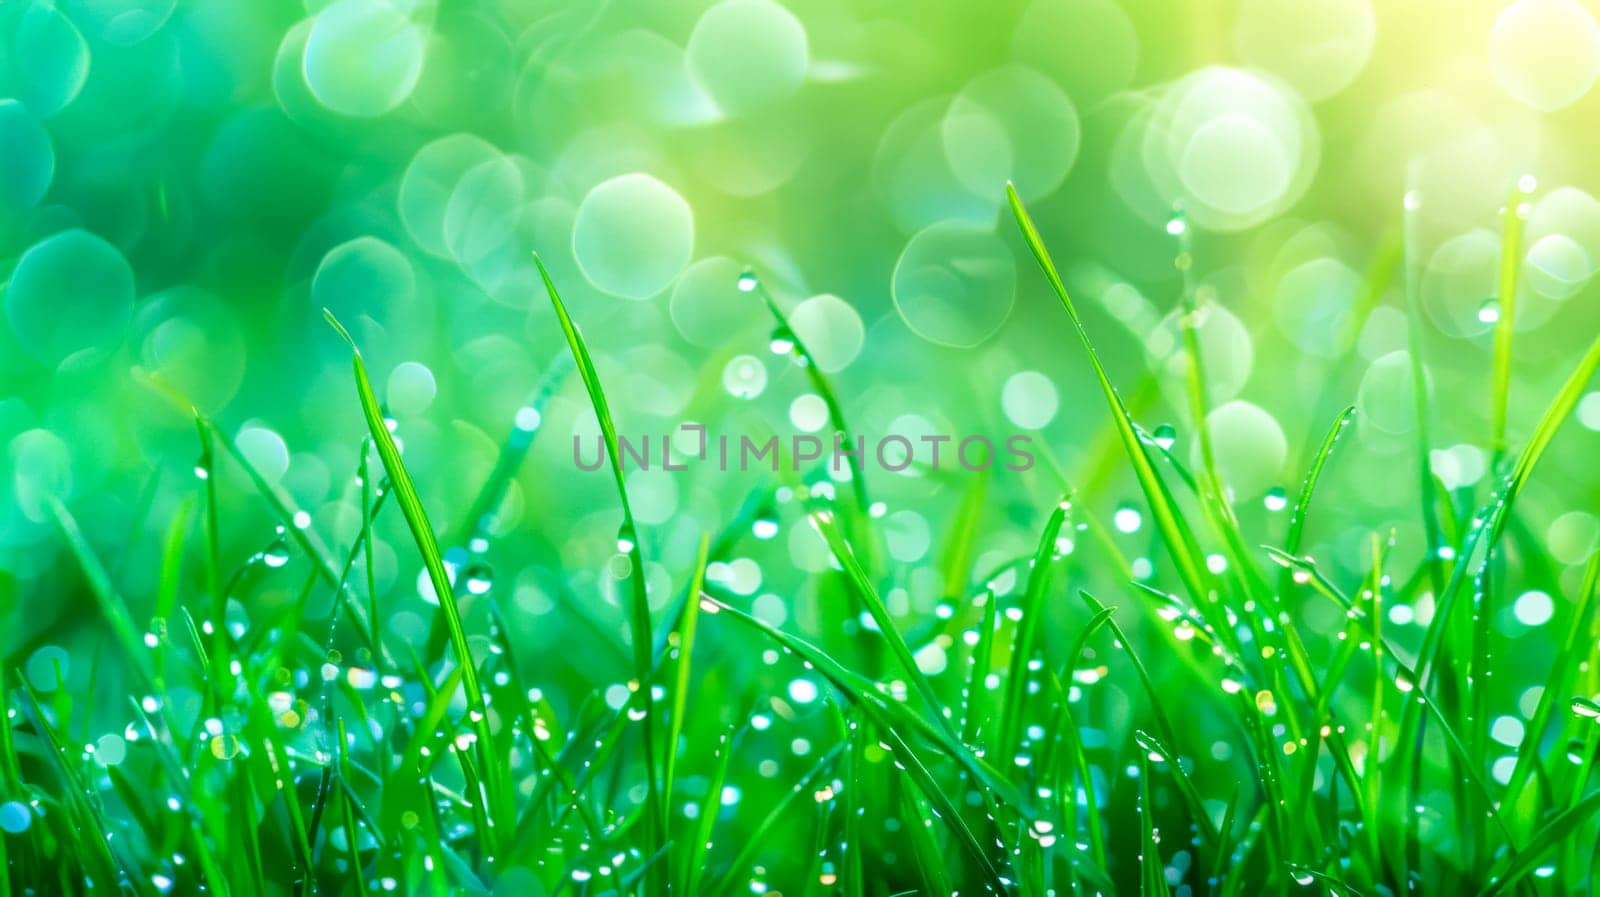 Peaceful and tranquil dew-kissed morning meadow with glistening water droplets on vibrant green grass, illuminated by the soft light of the sunrise, creating a serene and fresh natural environment